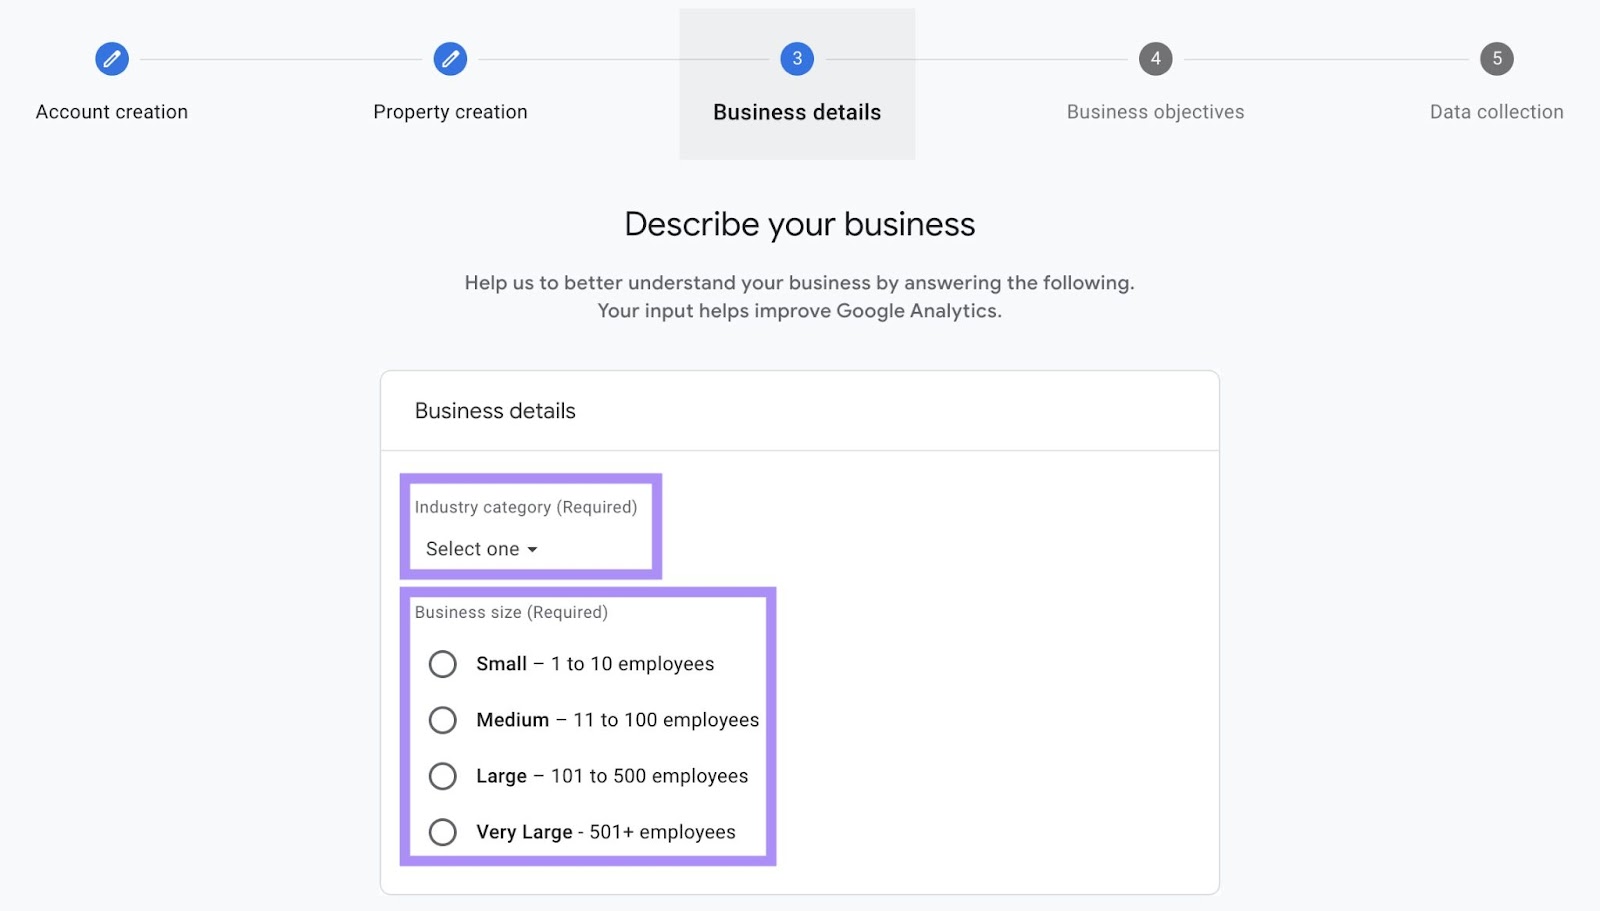 “Industry category” and “Business size” fields under "Describe your business" step